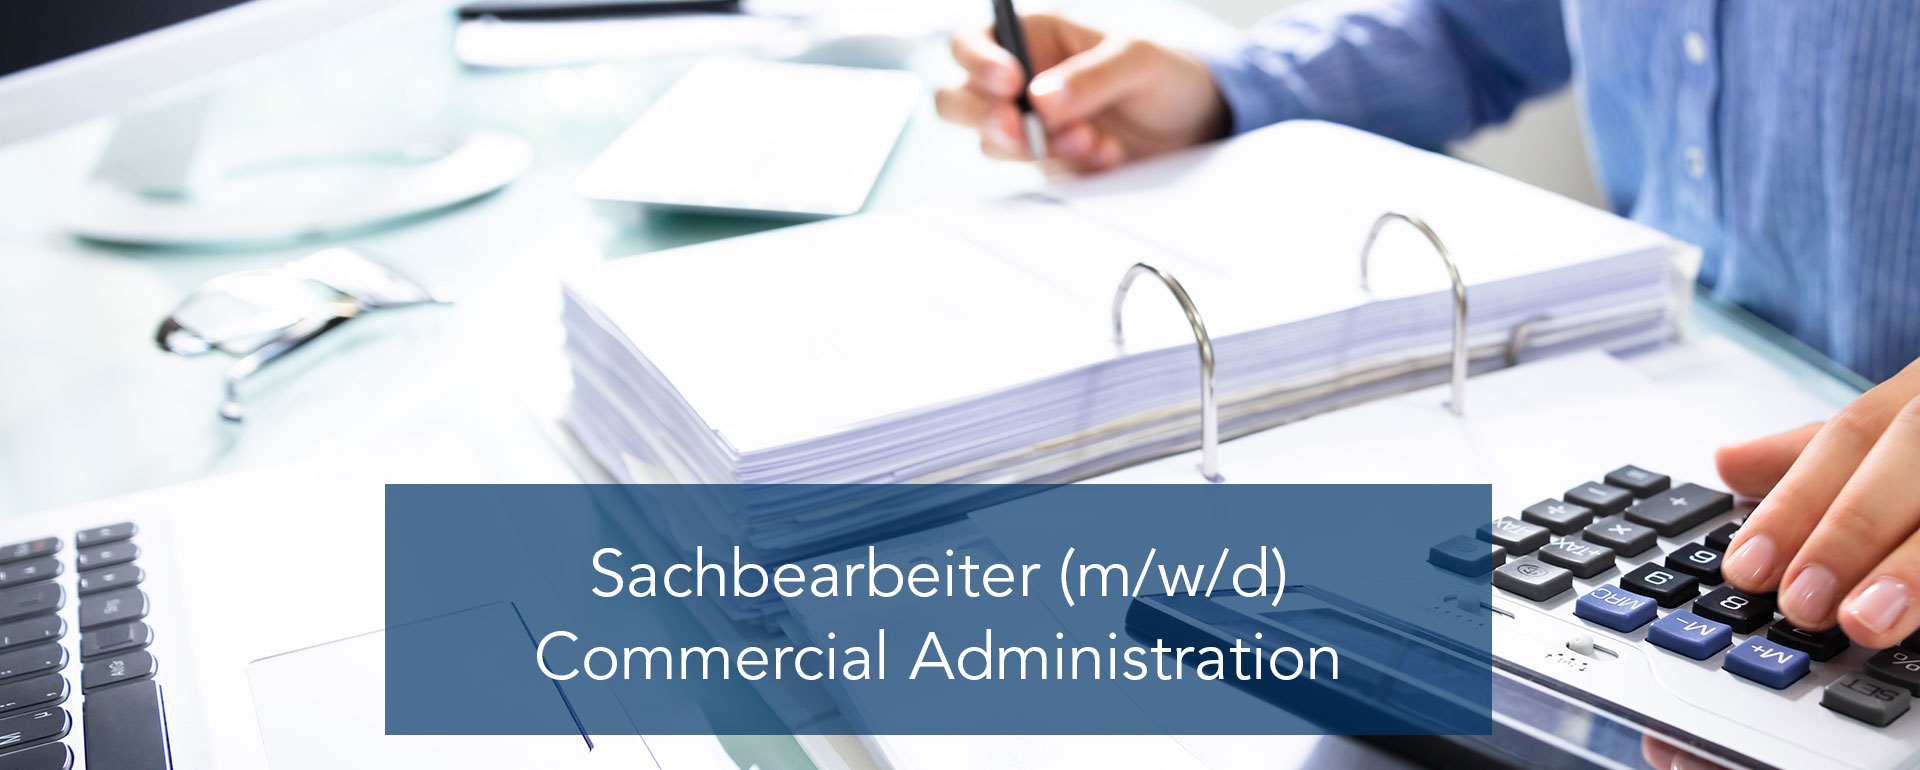 Sachbearbeiter (m/w/d) Commercial Administration